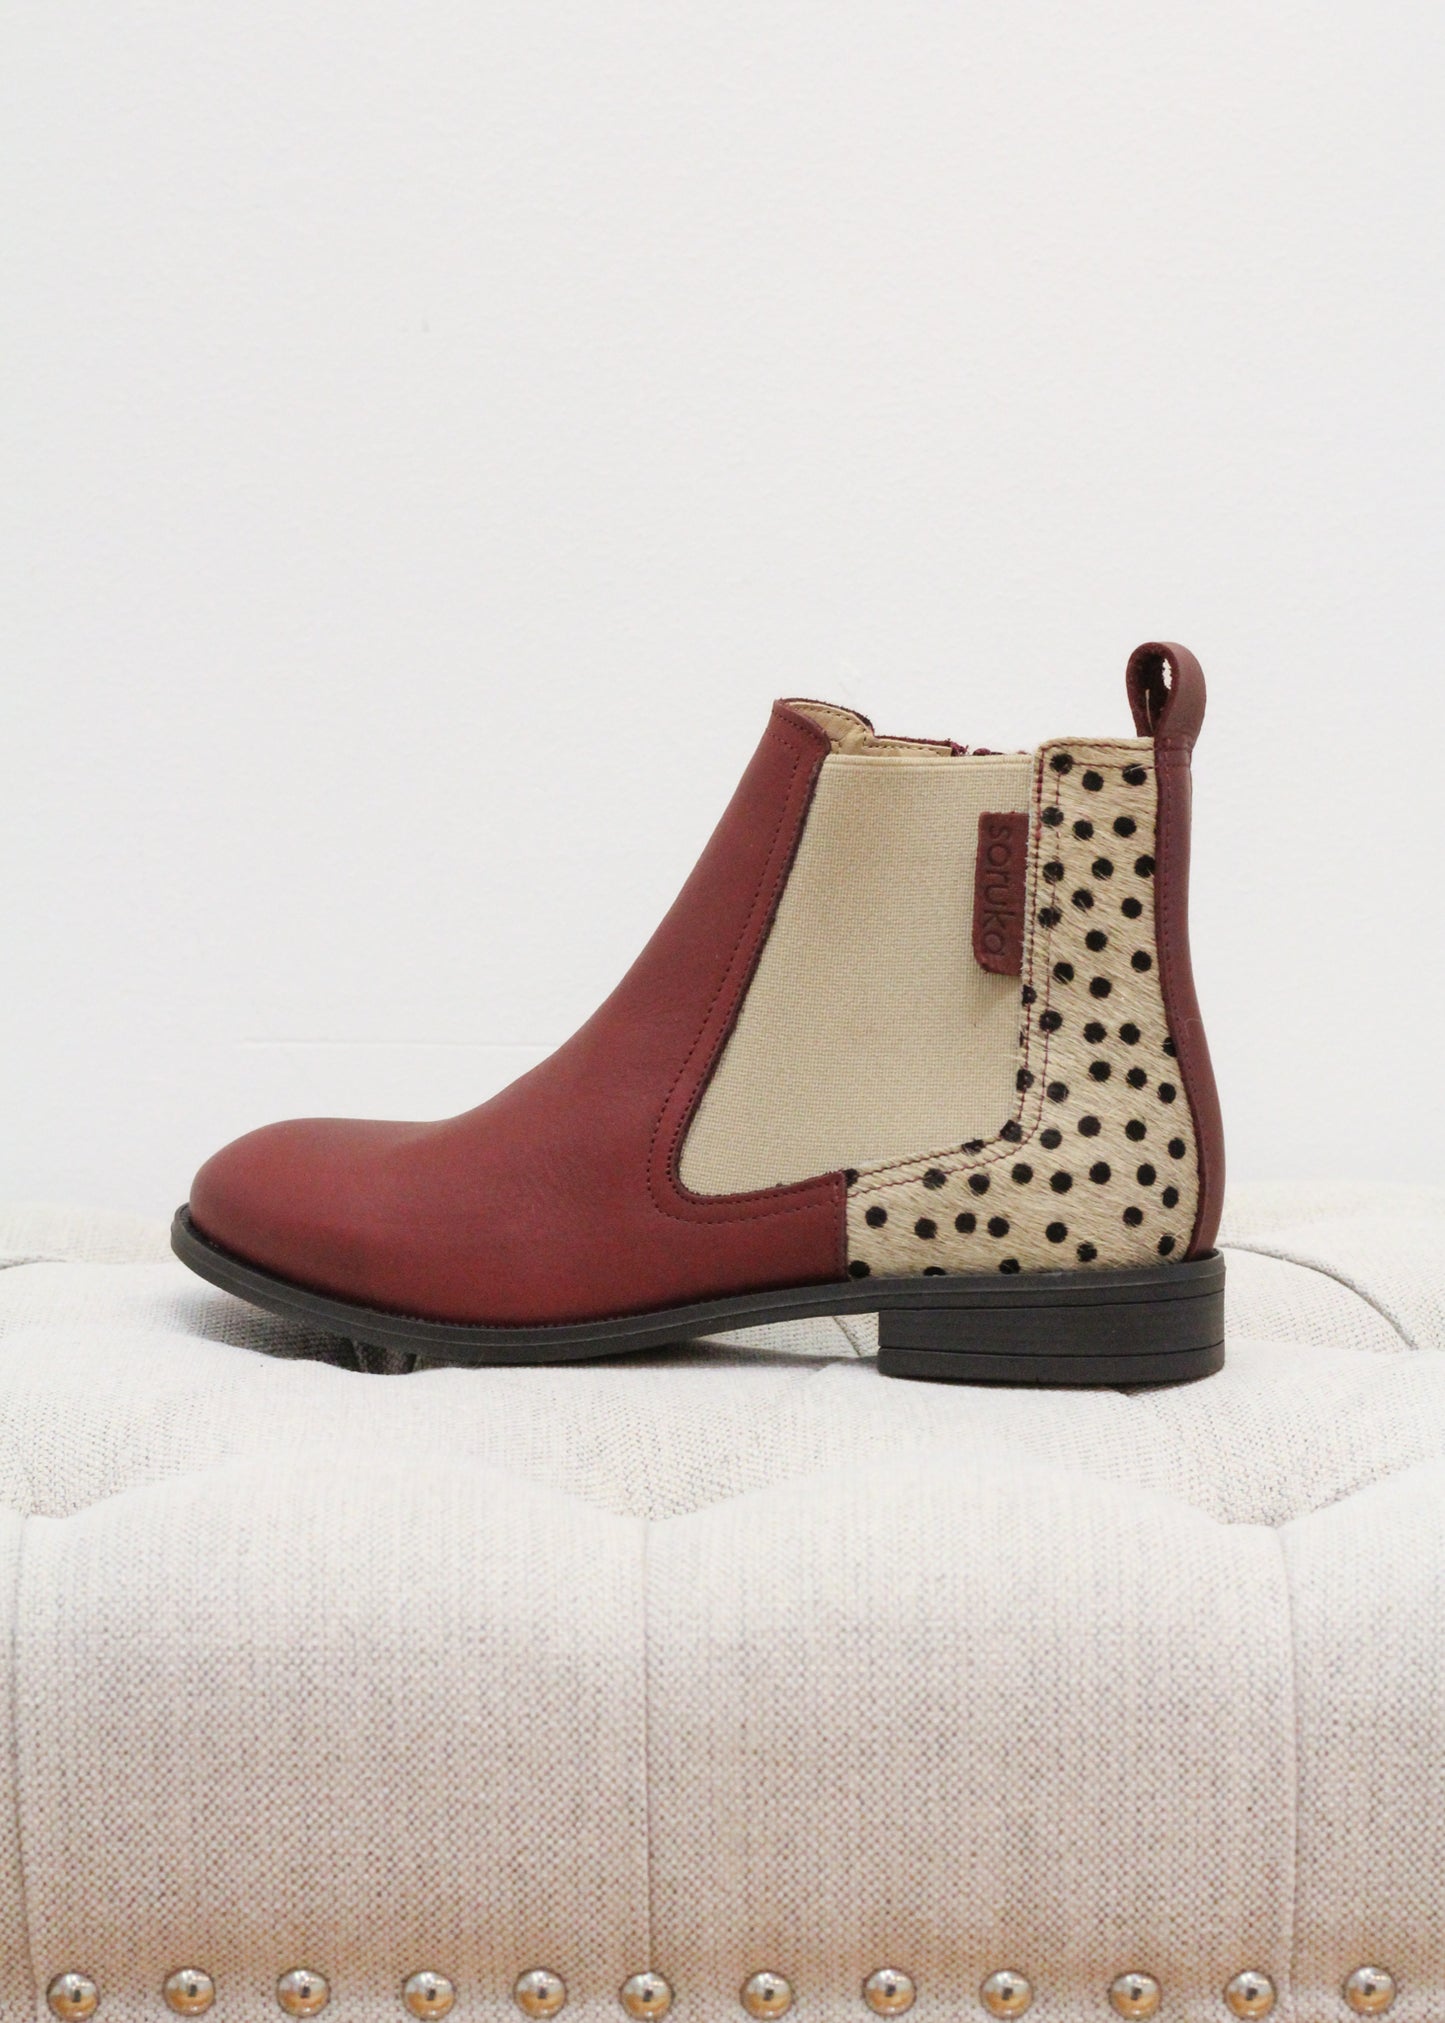 Soruka Vesta Ankle Boots in Burnt Maroon color. Sustainable and comfortable from Soruka Bags.